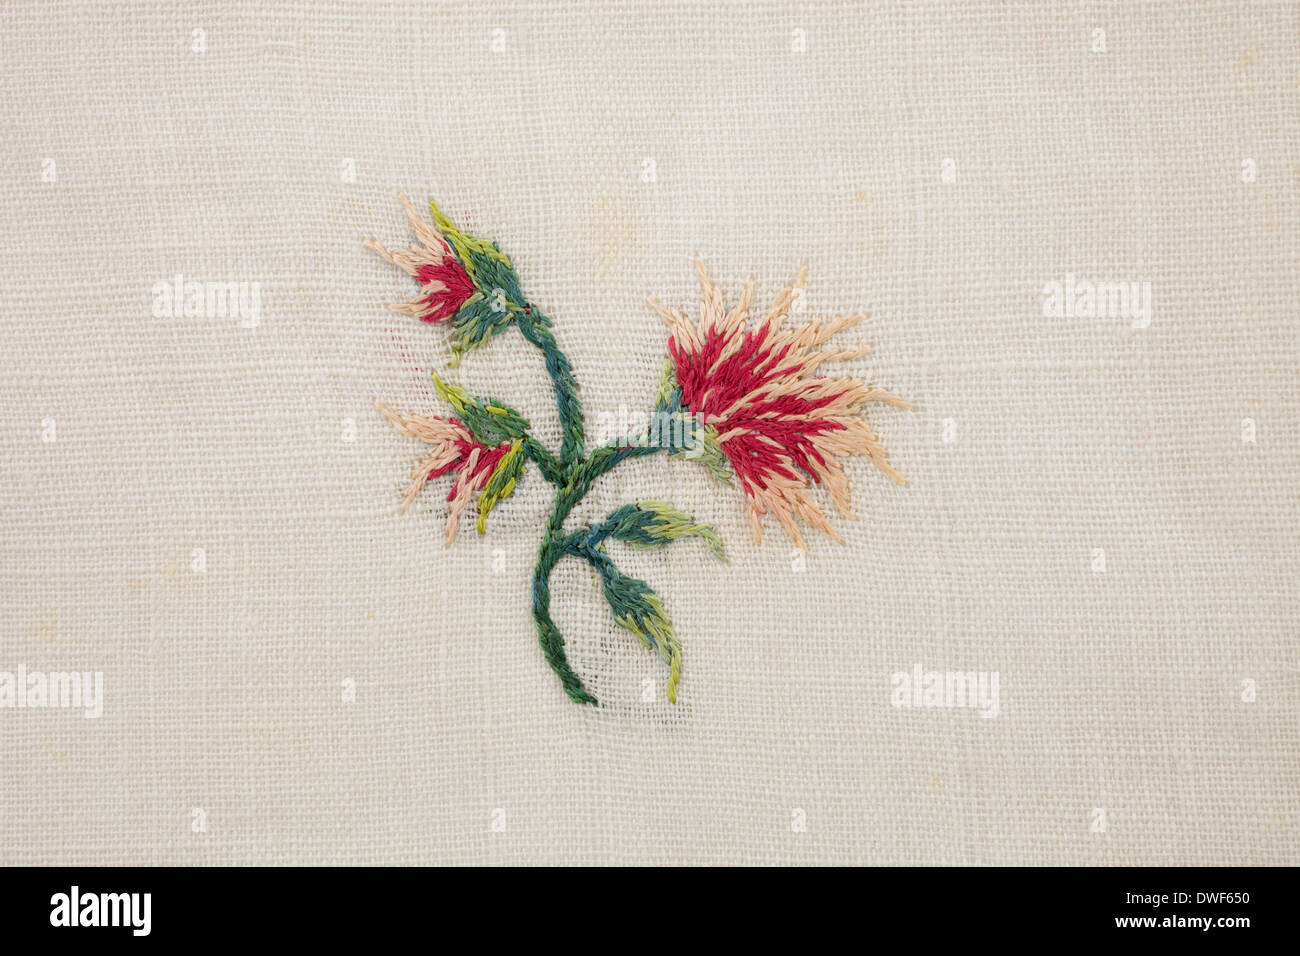 Hand Embroidery High Resolution Stock Photography and Images - Alamy